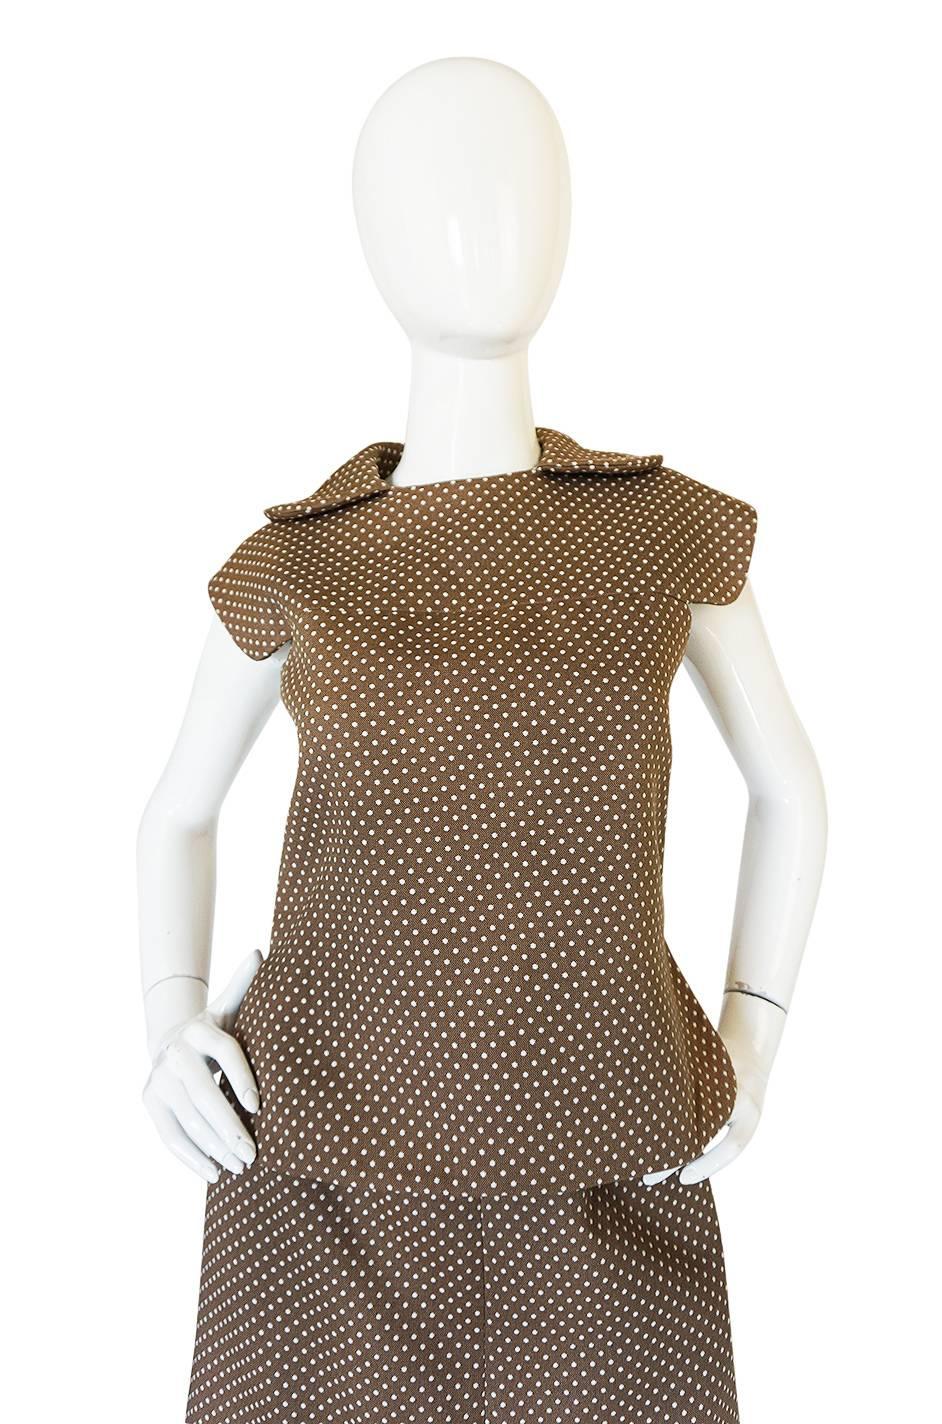 Women's Darling 1960s Dotted Pierre Cardin Top and Skirt Set